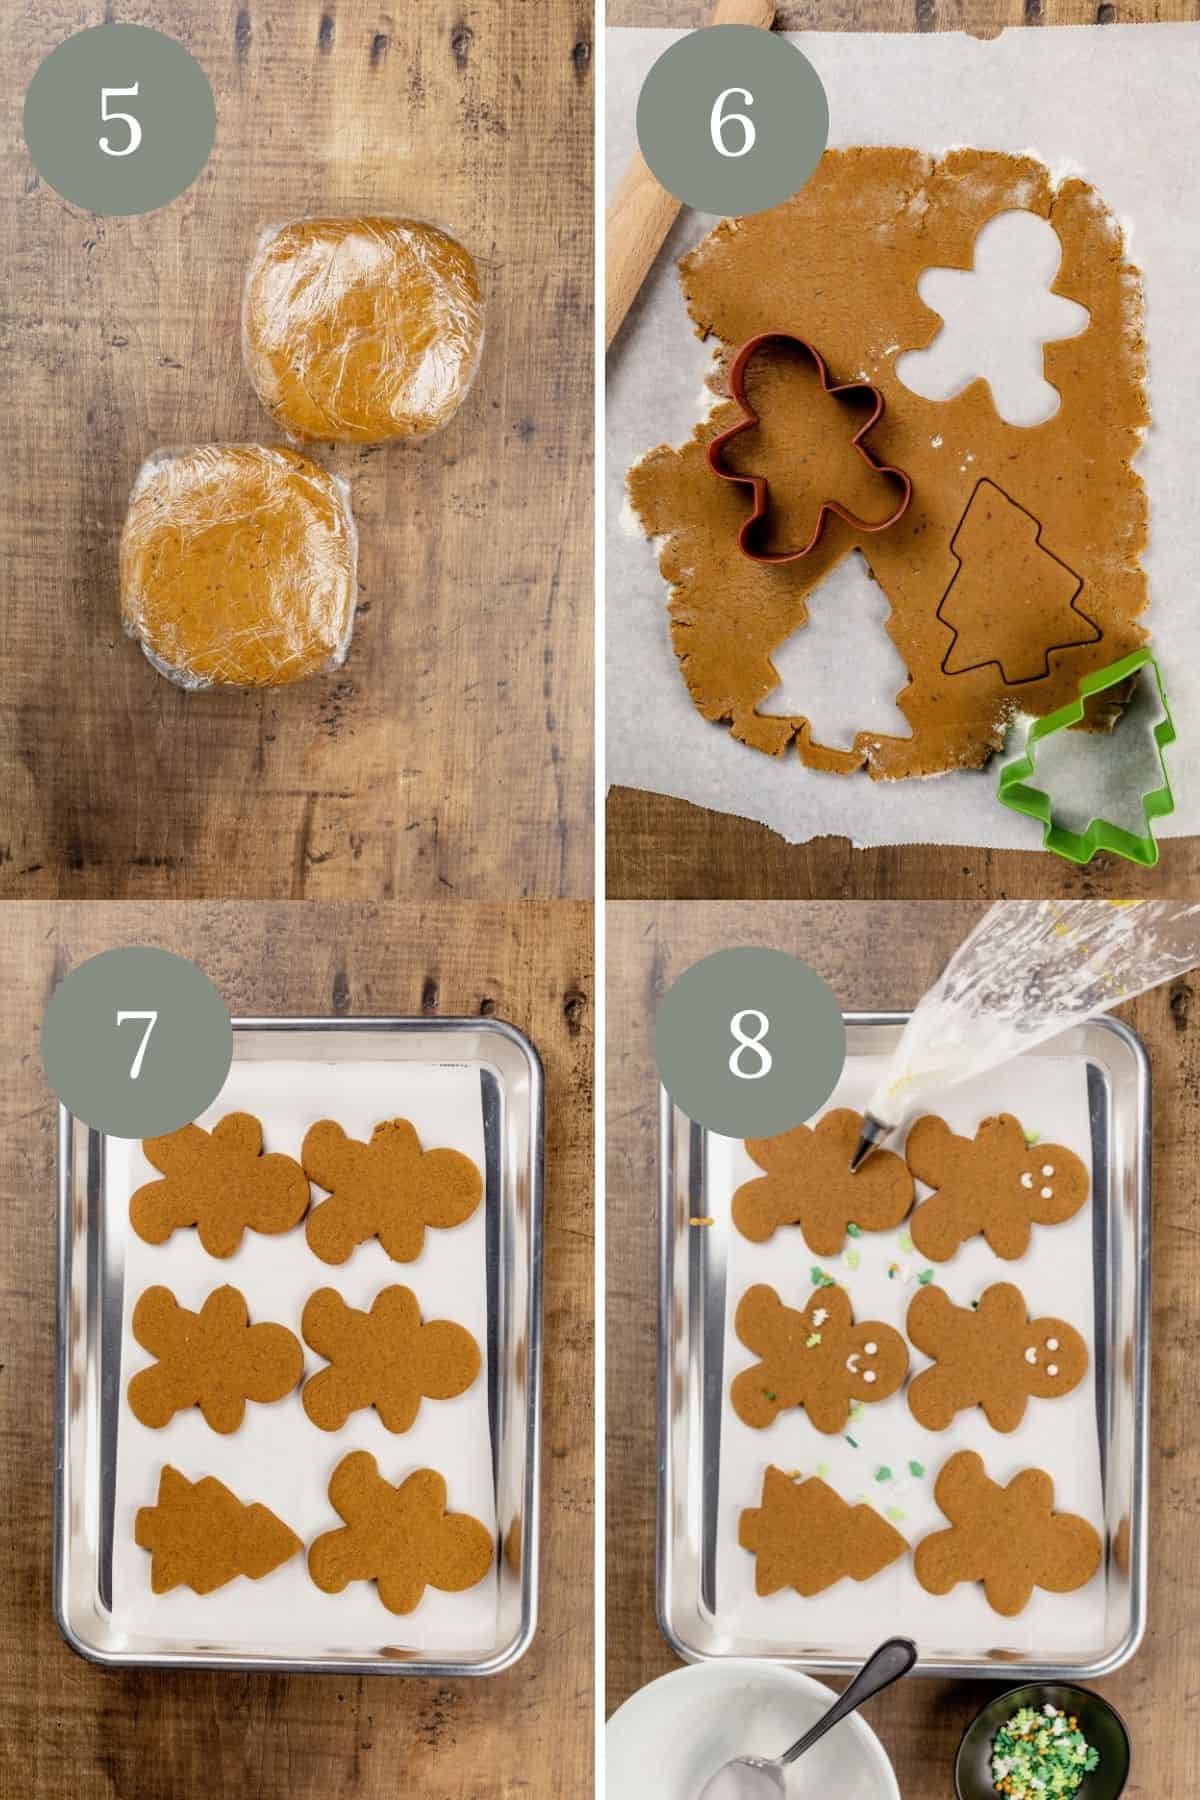 steps 5 through 8 of making gingerbread in a collage showing off each step for the cookies.